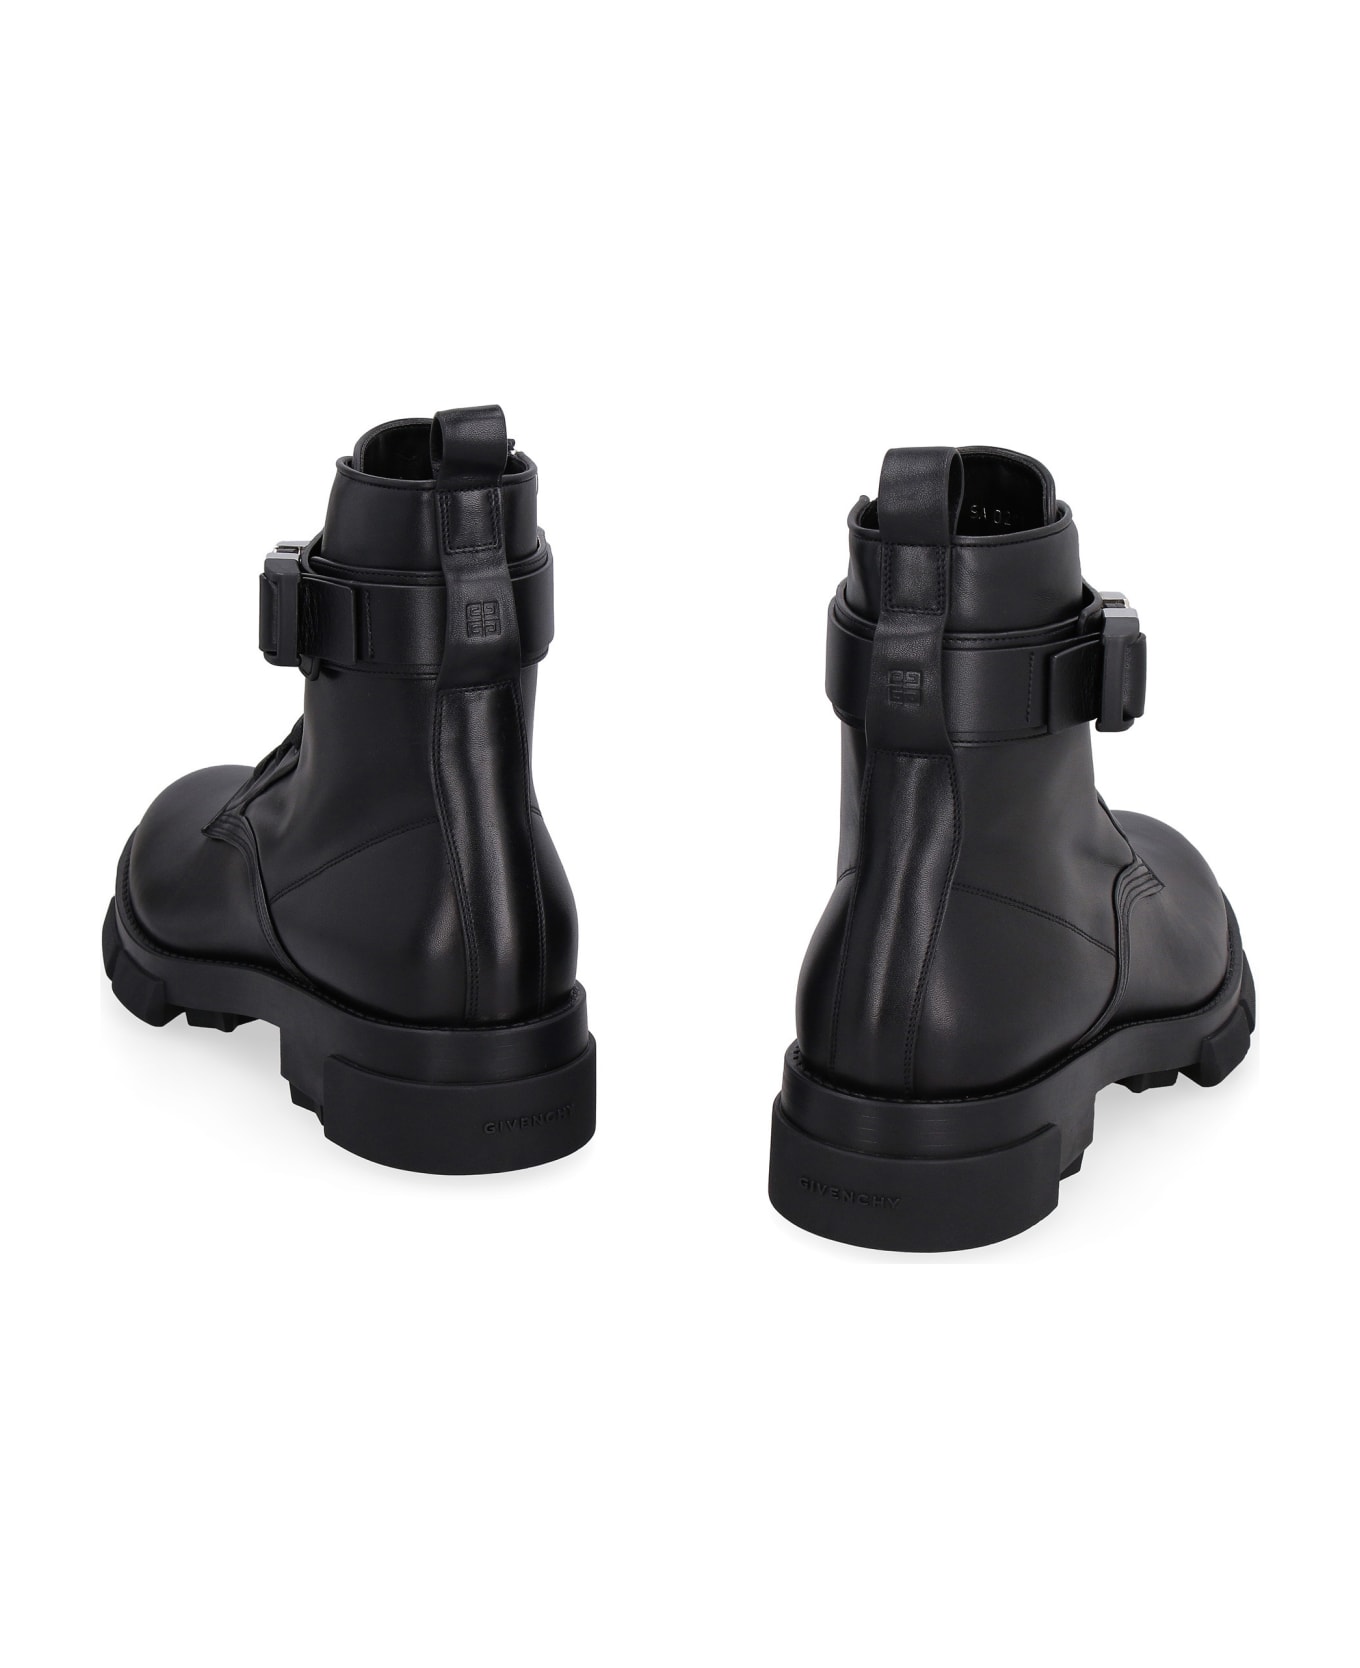 Givenchy Terra Leather Ankle Boots - BLACK ブーツ